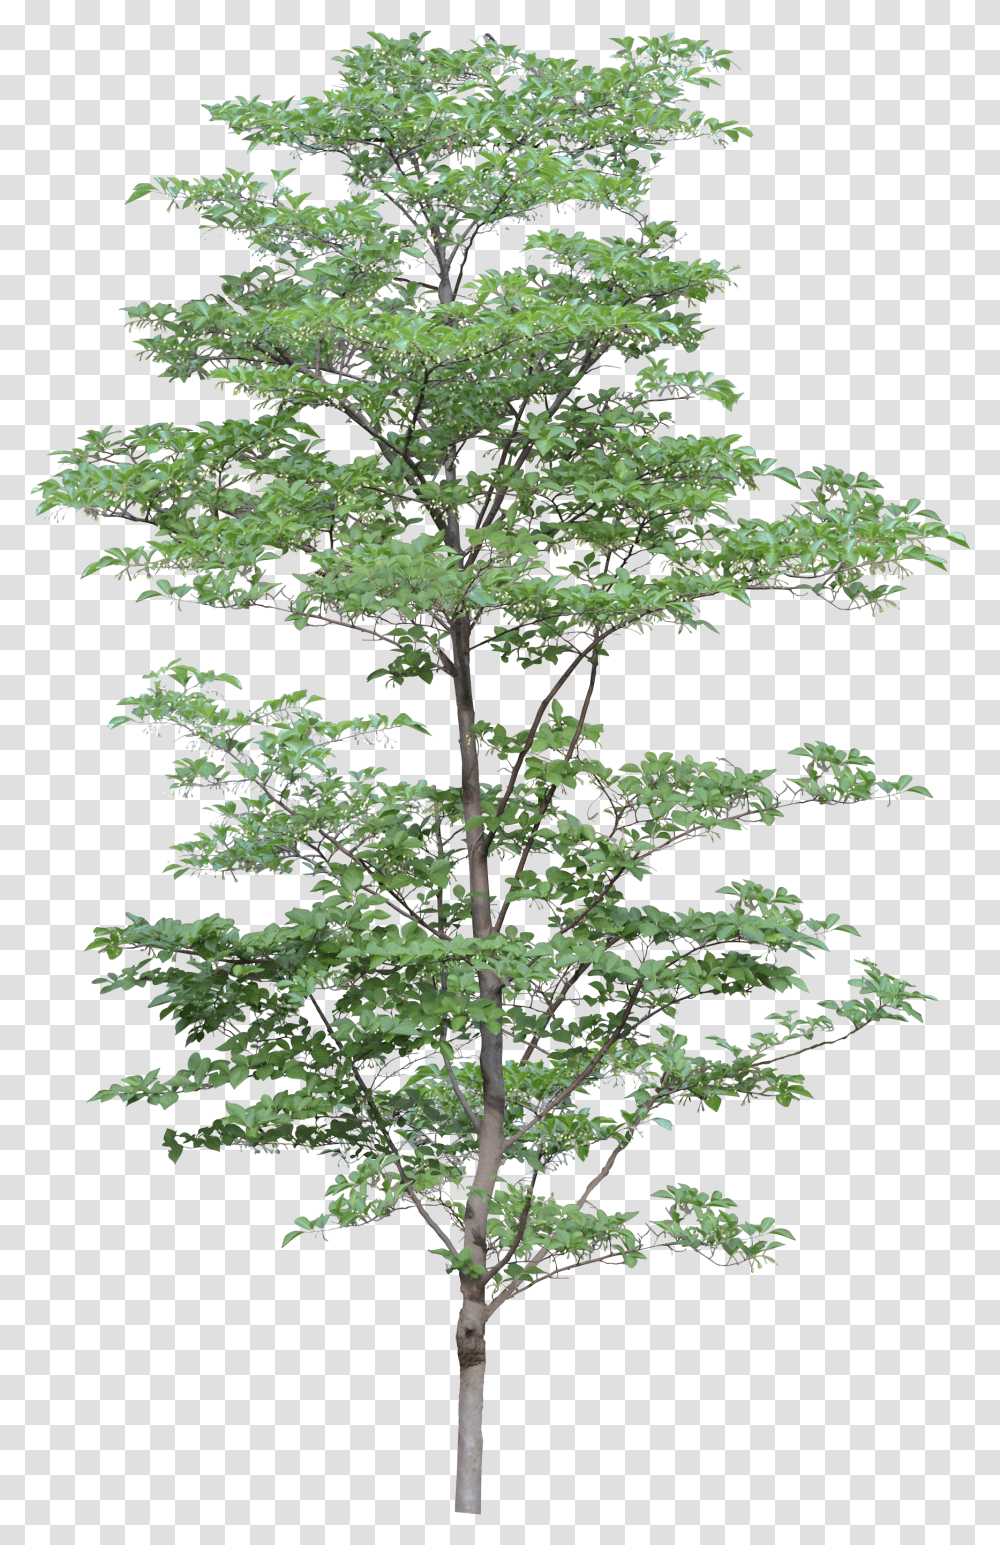 Trees For Photoshop Free Background Format Trees, Plant, Maple, Oak, Sycamore Transparent Png